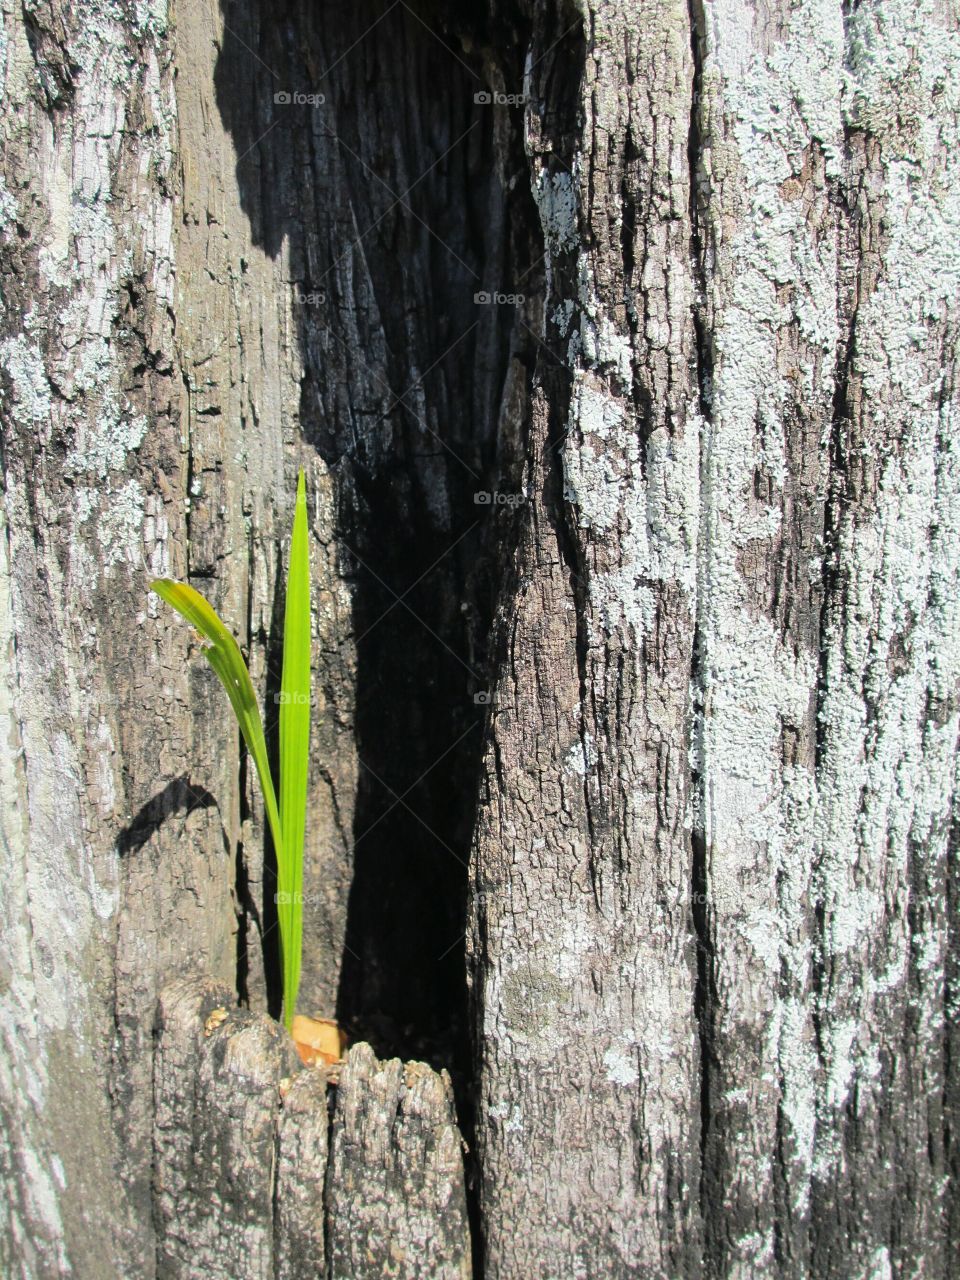 Small green plant growing on tree trunk